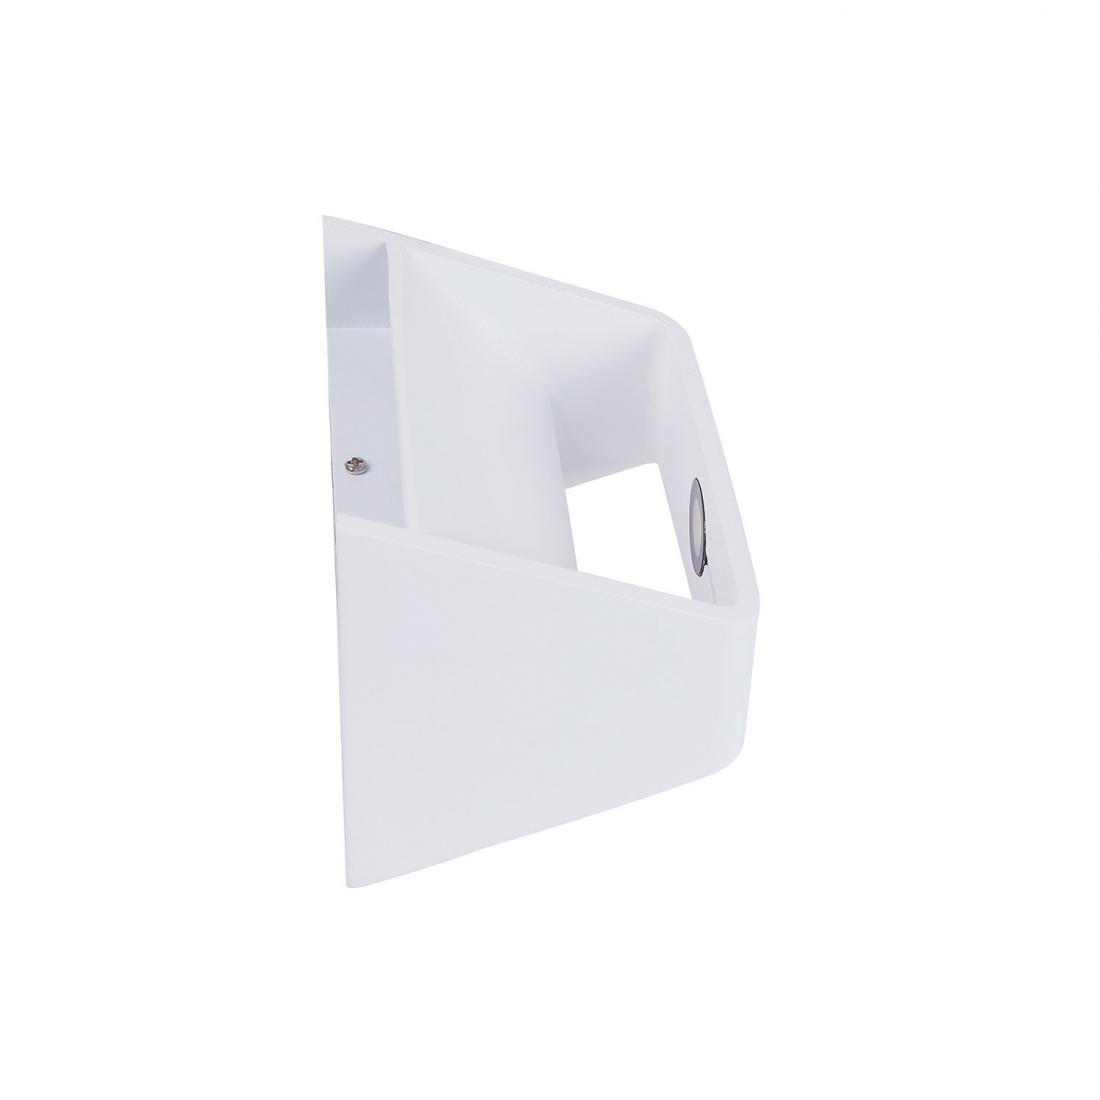 3W indoor white wall mounted wall lights